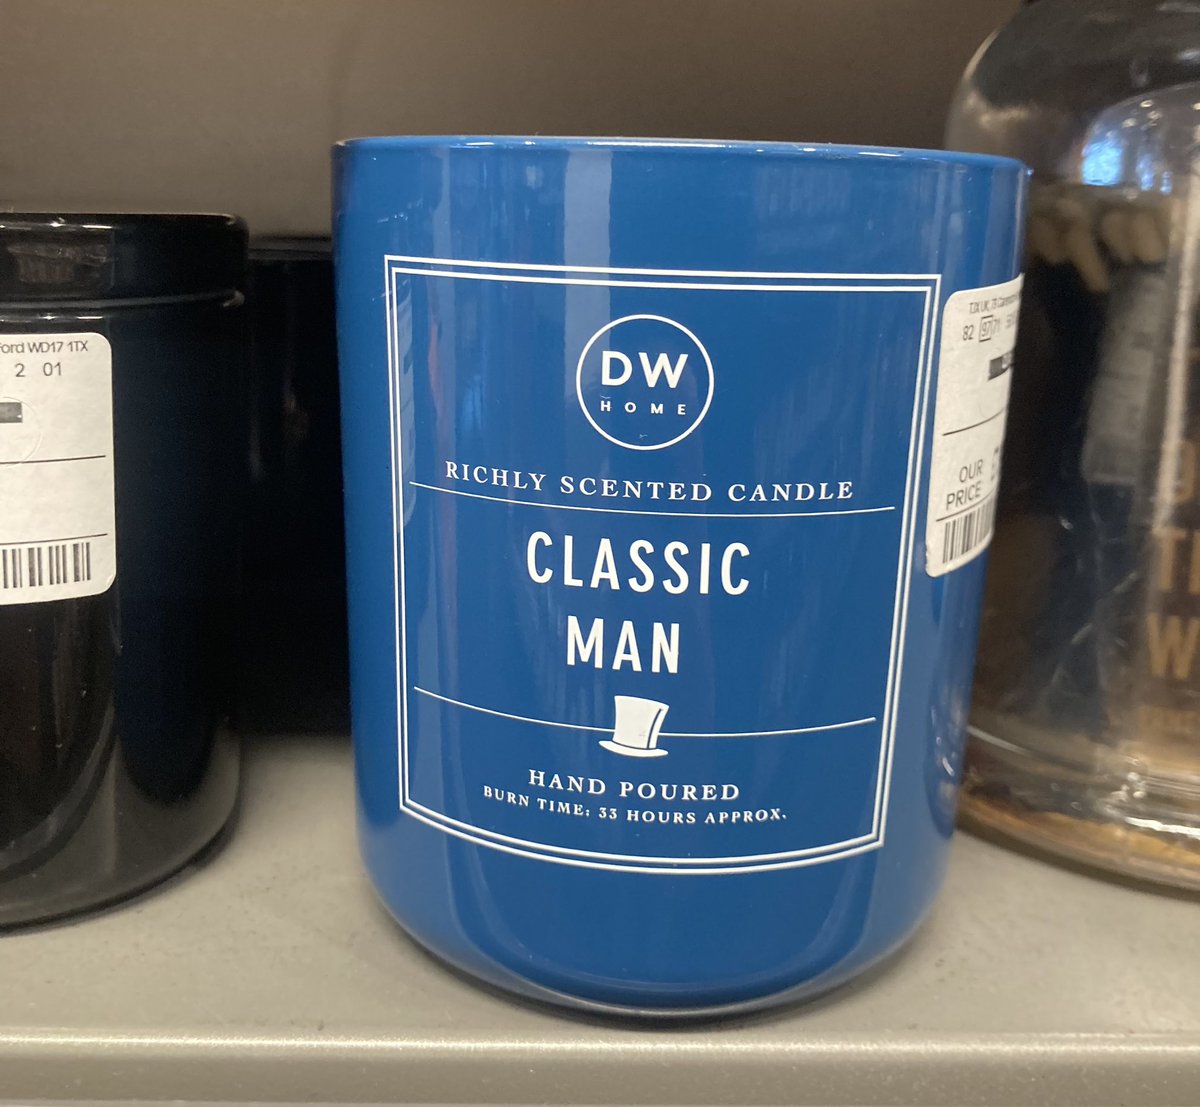 Finally! My search for a candle that smells of Opinions is over.